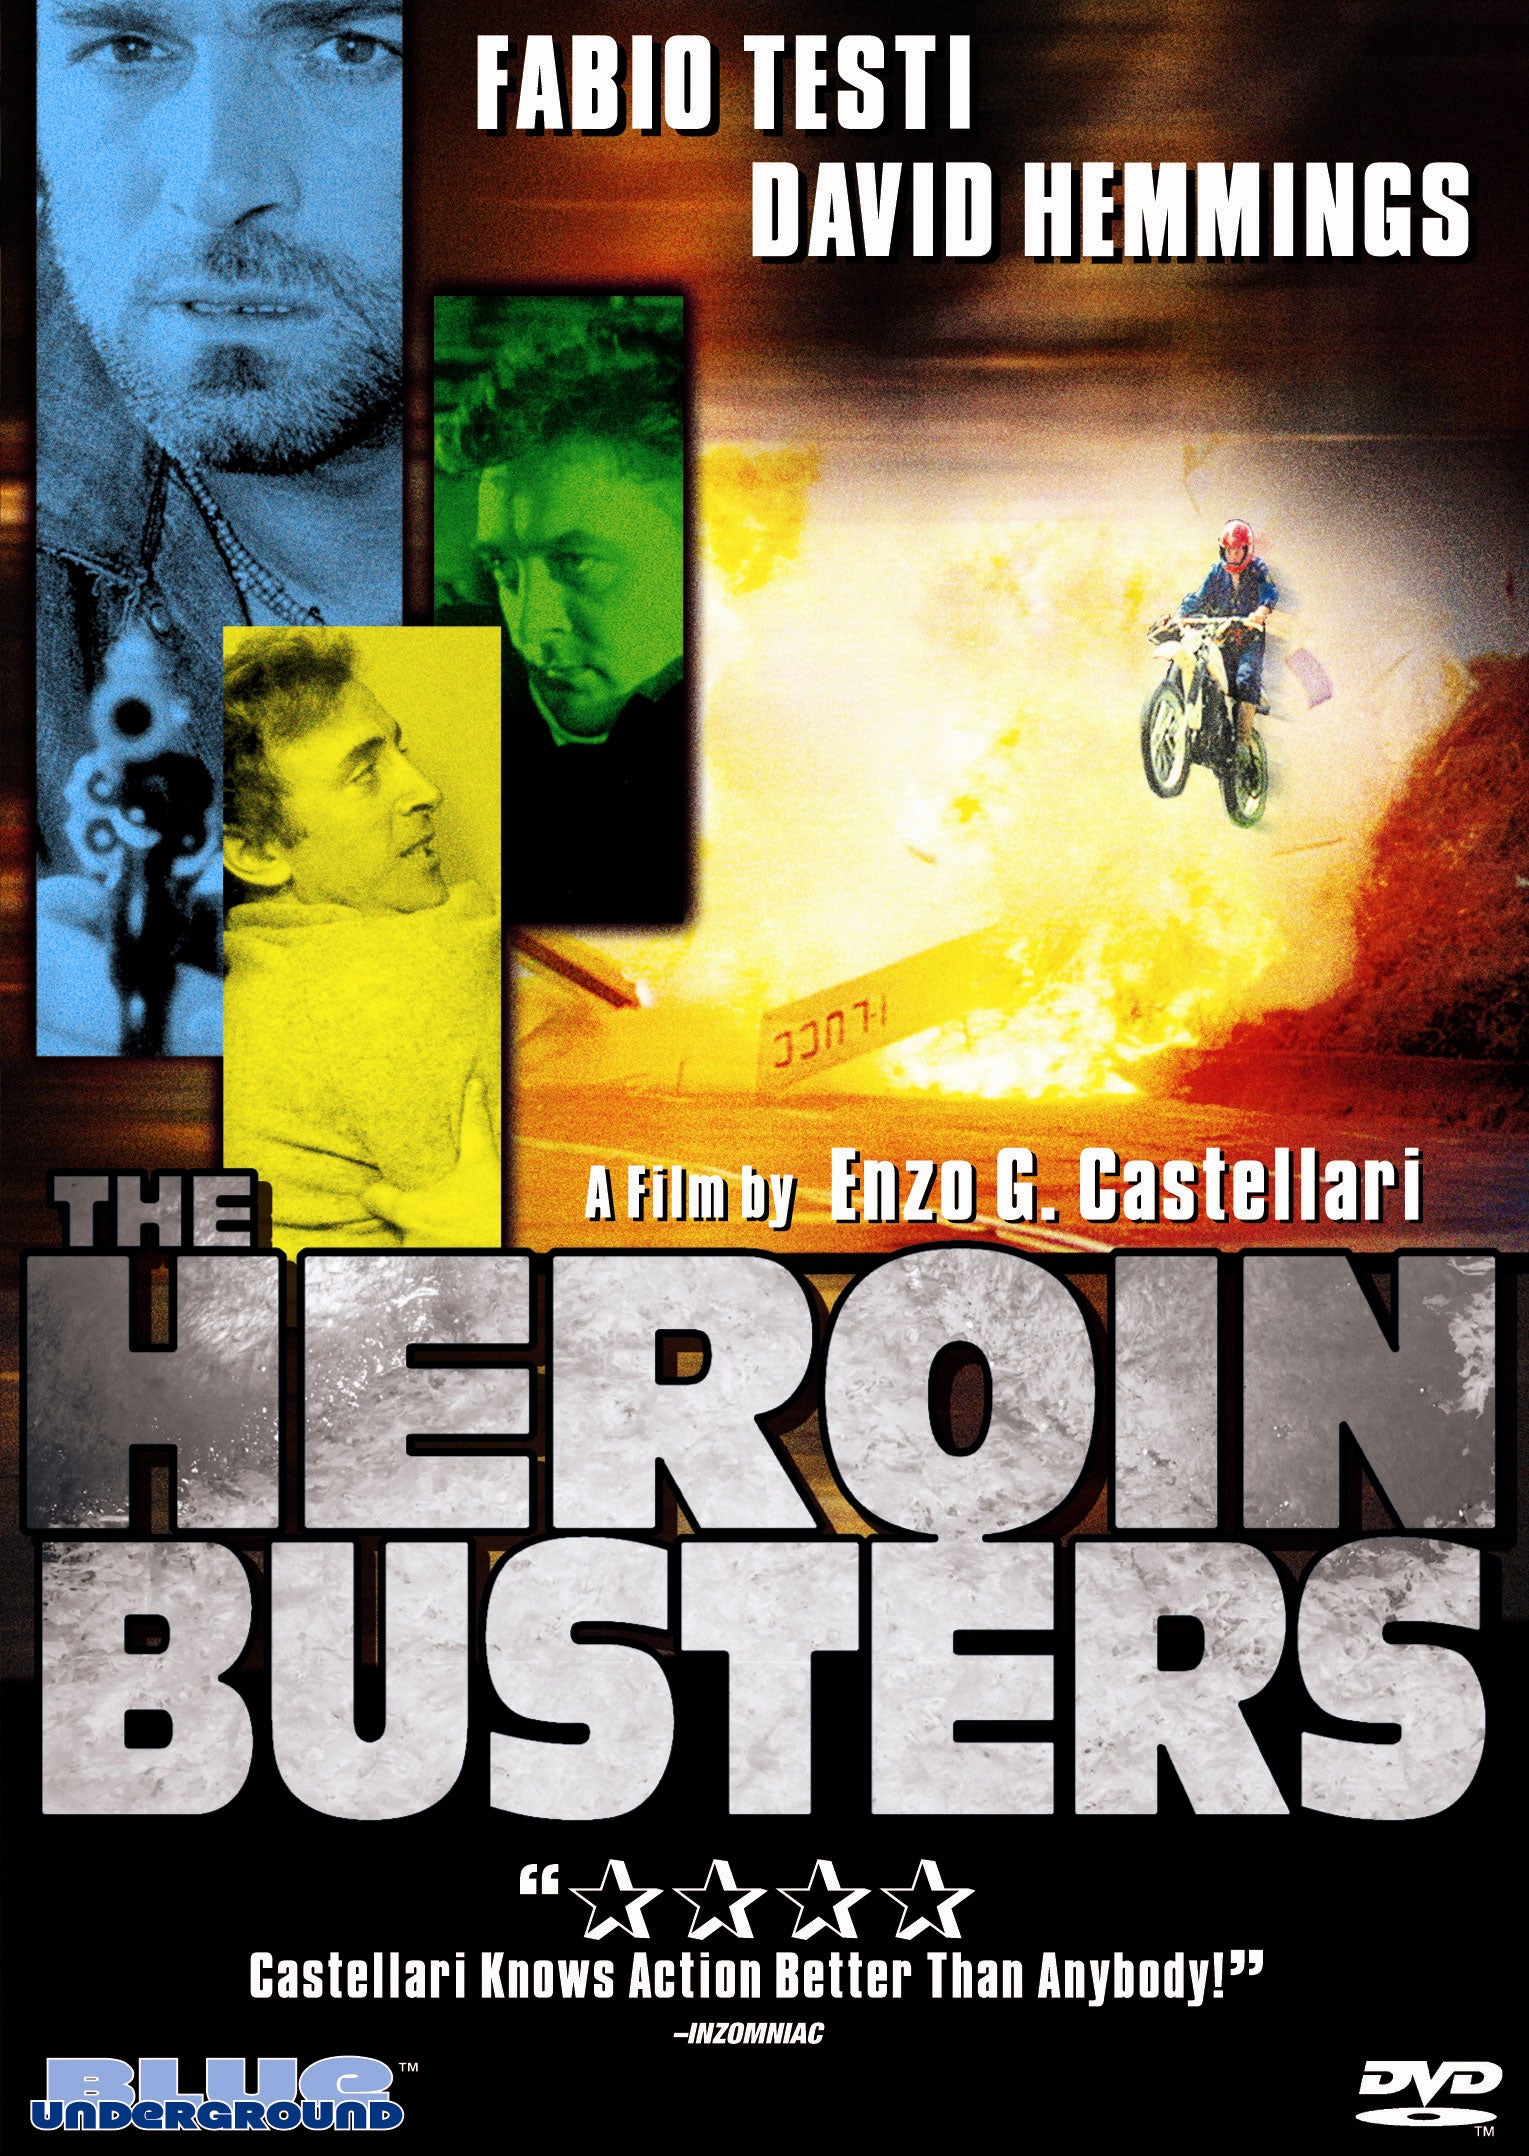 THE HEROIN BUSTERS DVD